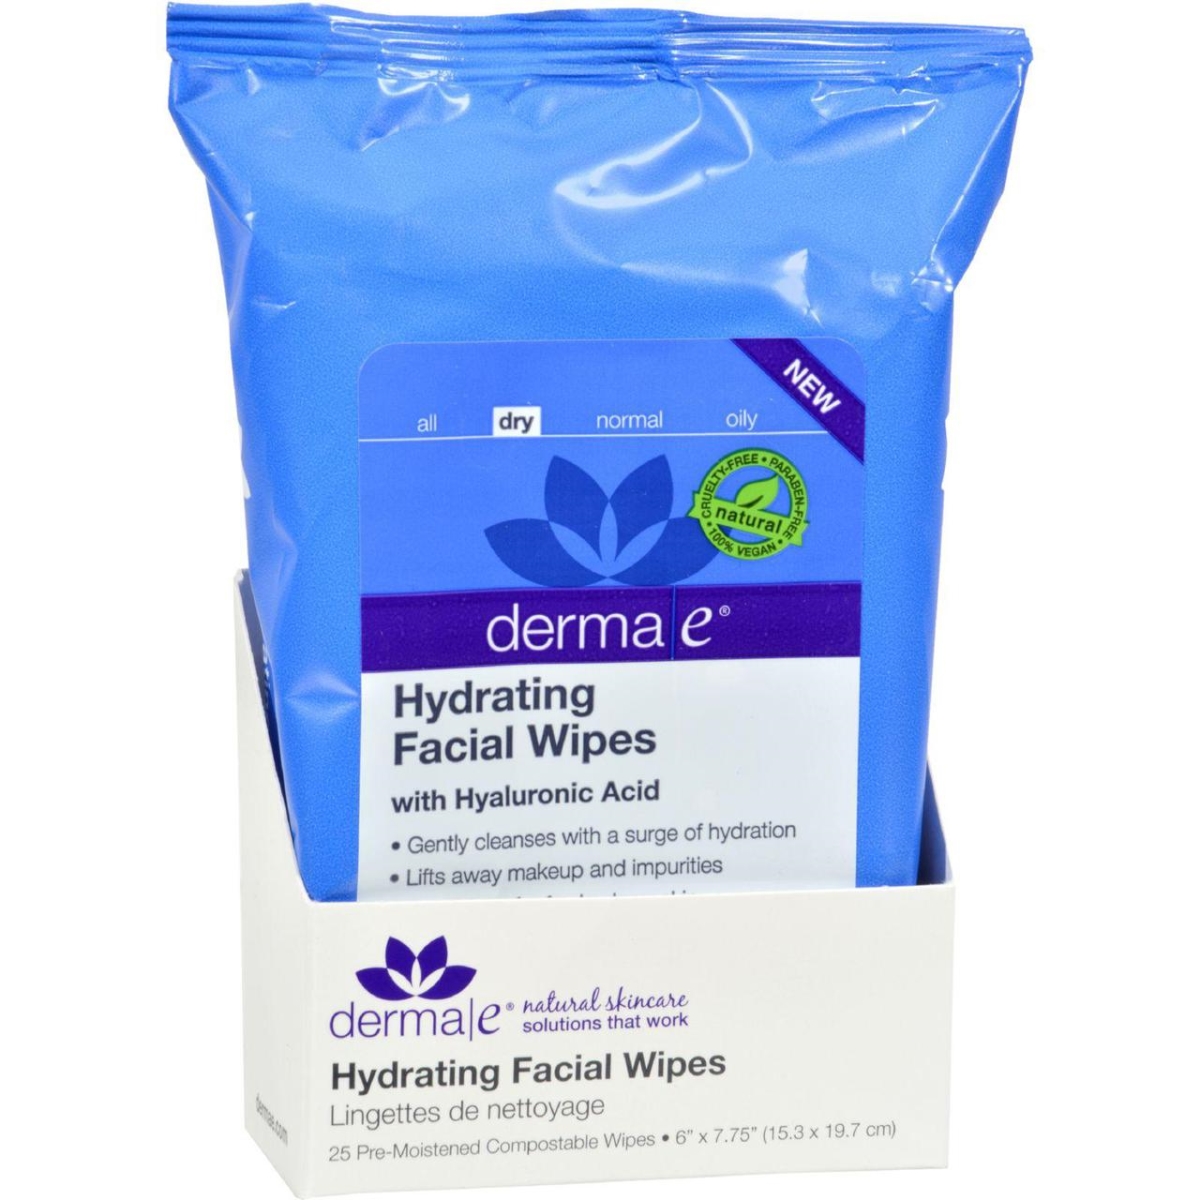 Derma E Hg1510213 Hydrating Facial Wipes, 25 Count